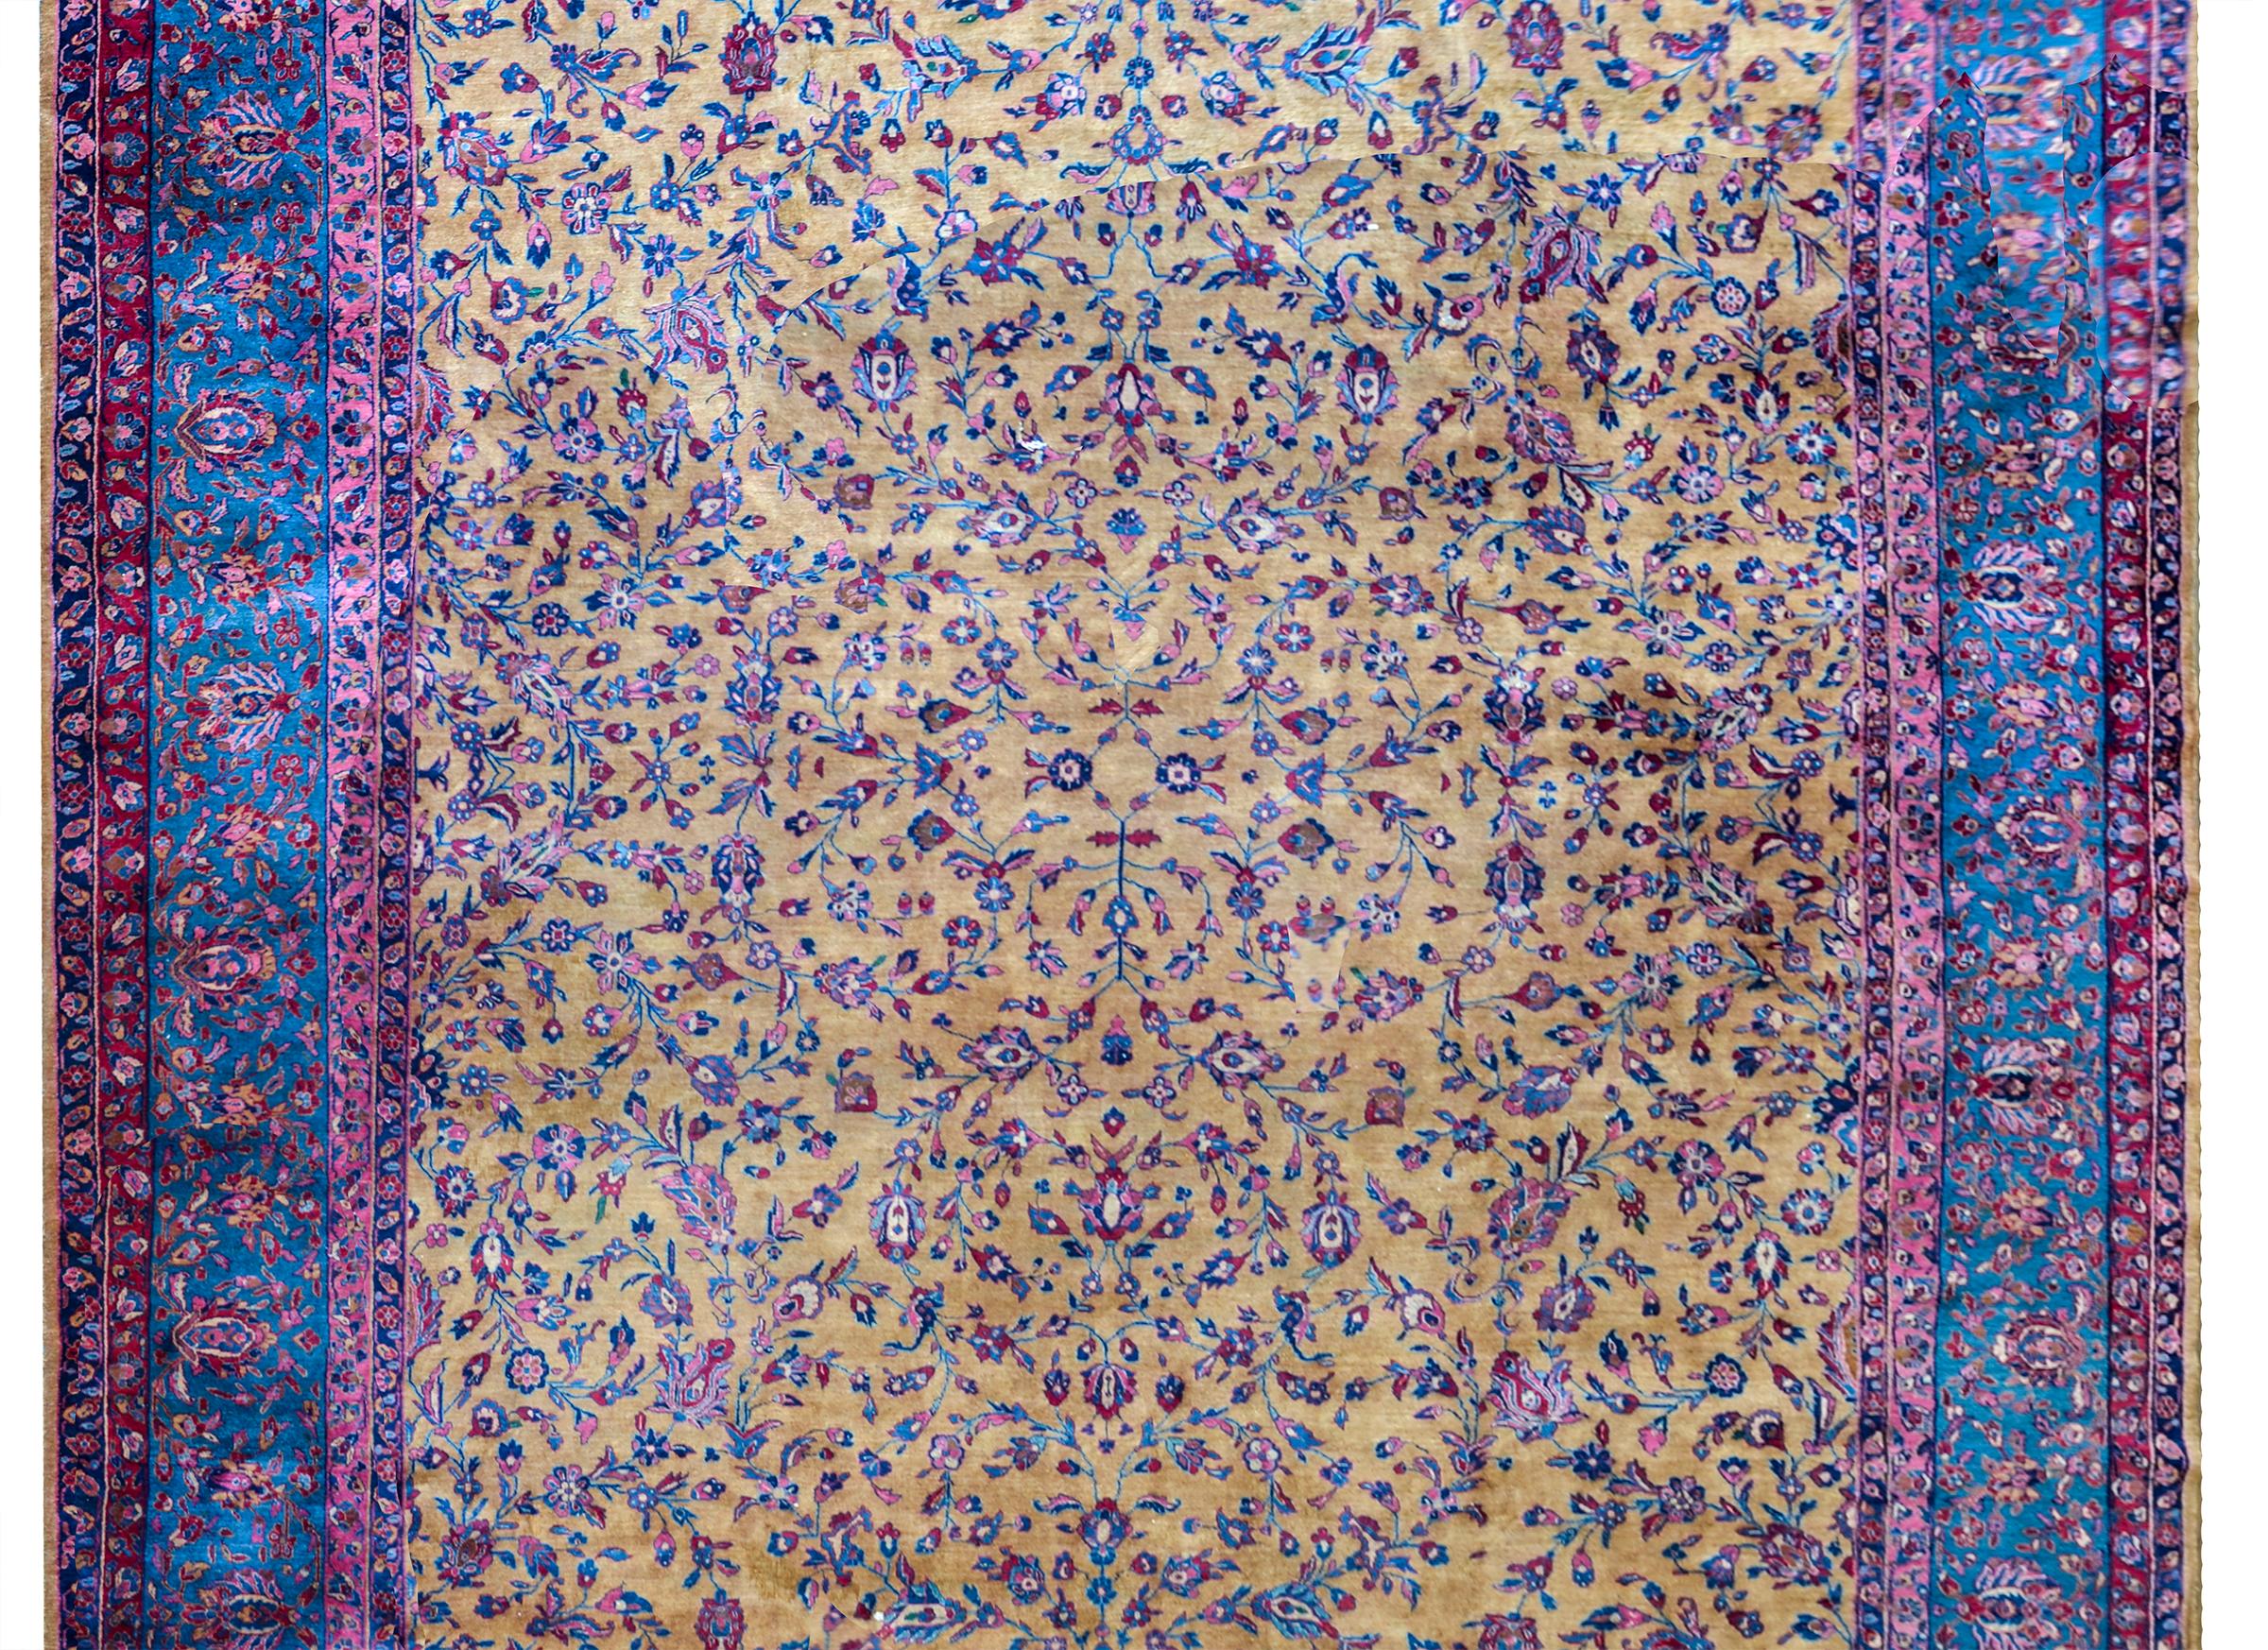 An incredible early 20th century Persian Kashan rug with a beautiful yellow field with a mirrored floral and scrolling pattern woven in pinks, indigos, and greens, and surrounded but a wide complex border containing a wide central floral patterned